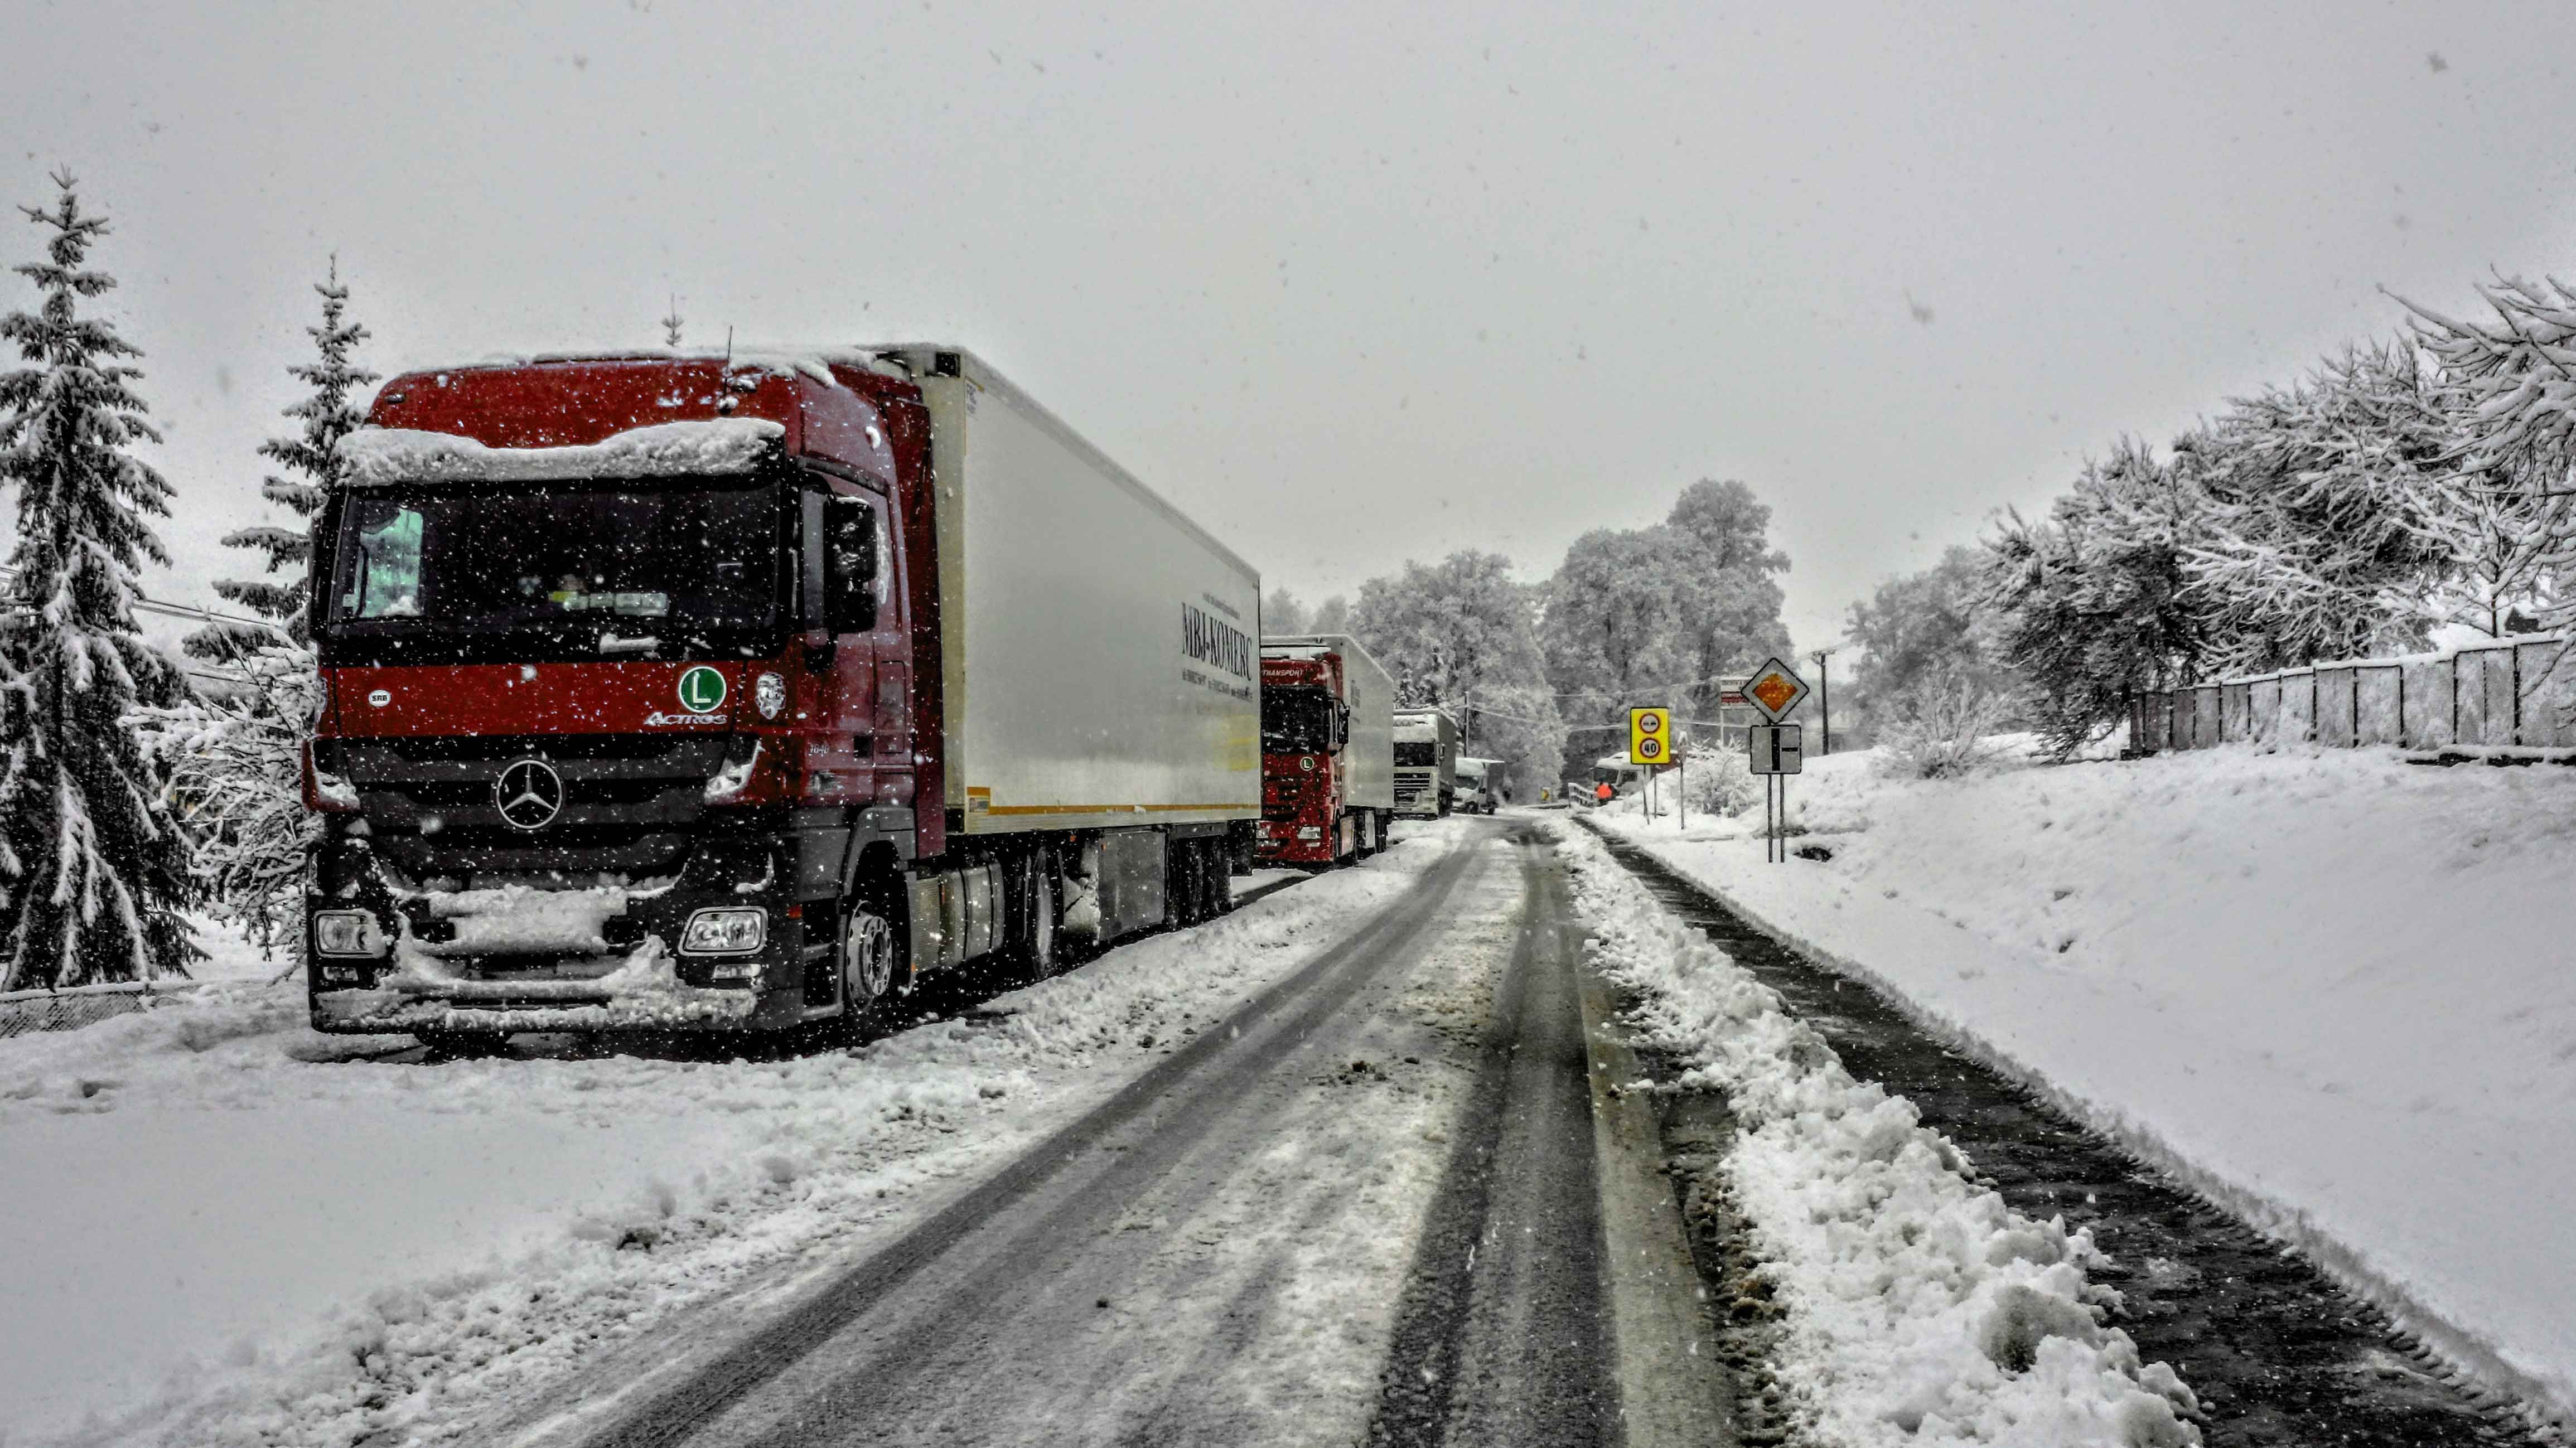 Truckers will hit 2 regions of snowstorms this week